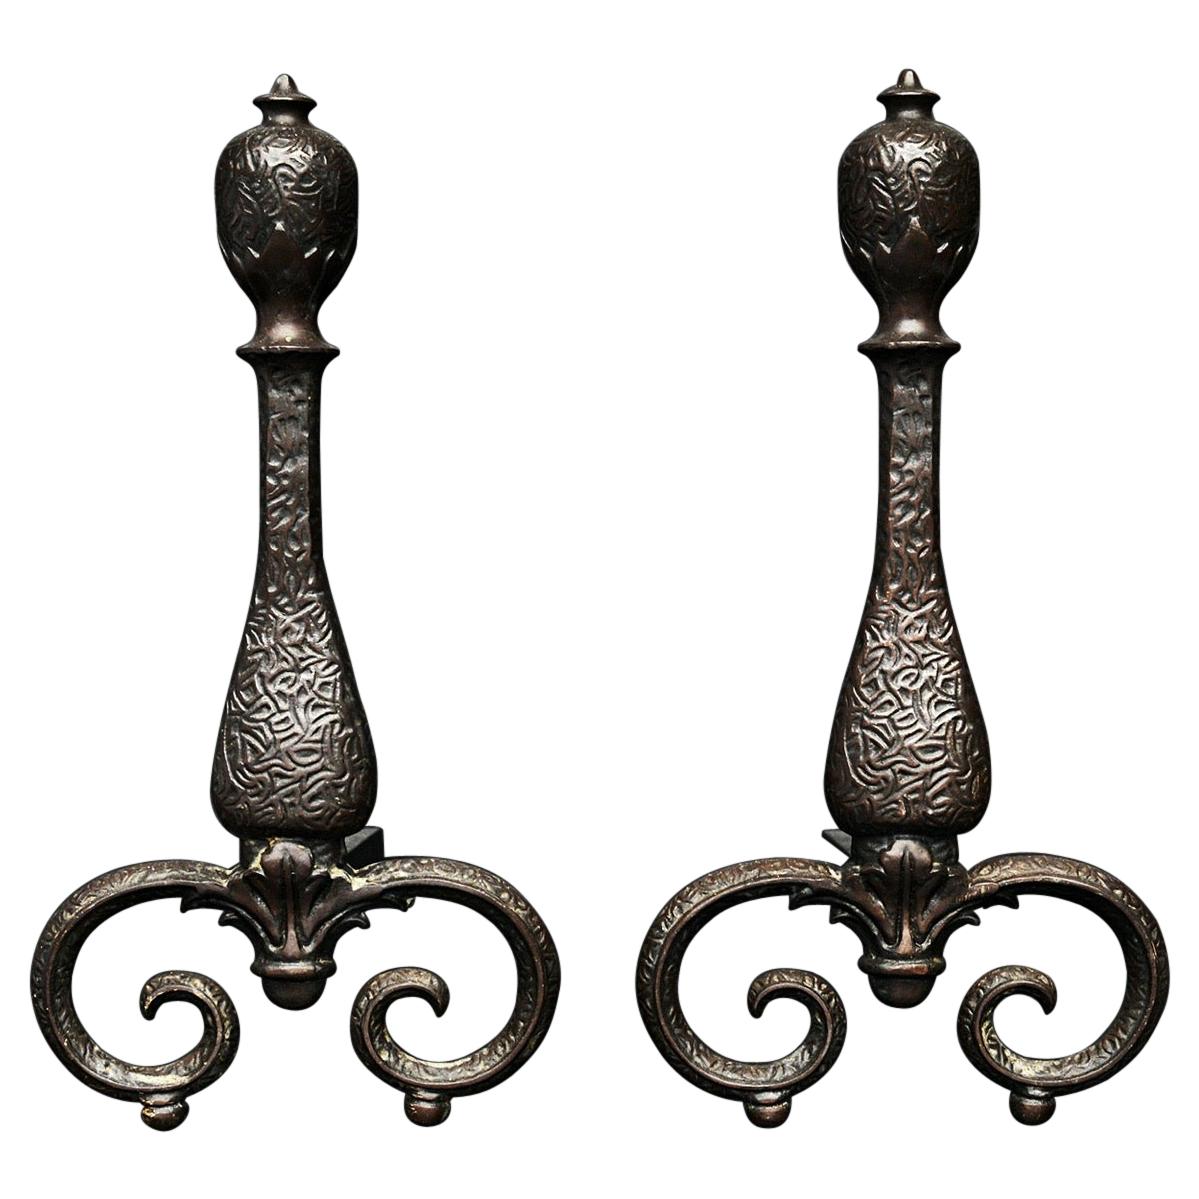 A Decorative Pair of Iron Firedogs